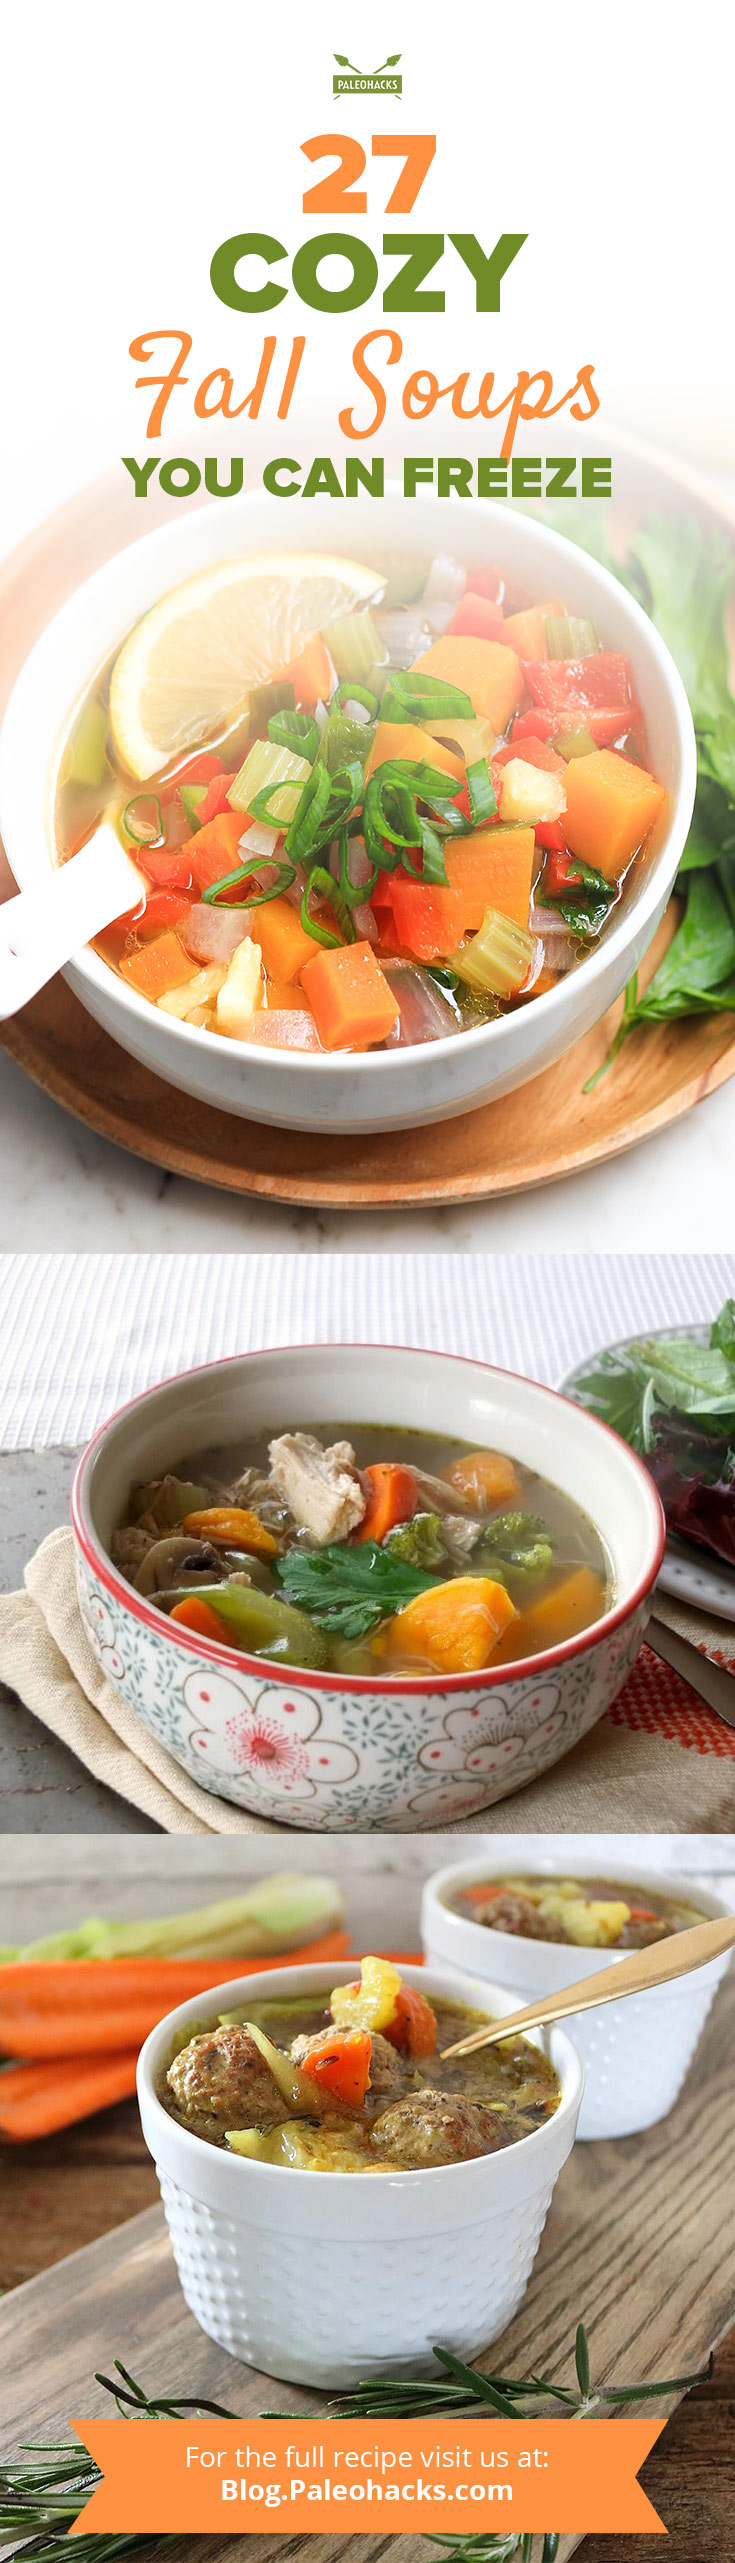 Cozy up to these fall soup ideas you can freeze and serve on days you don’t feel like cooking. Never underestimate the power of leftover soup!